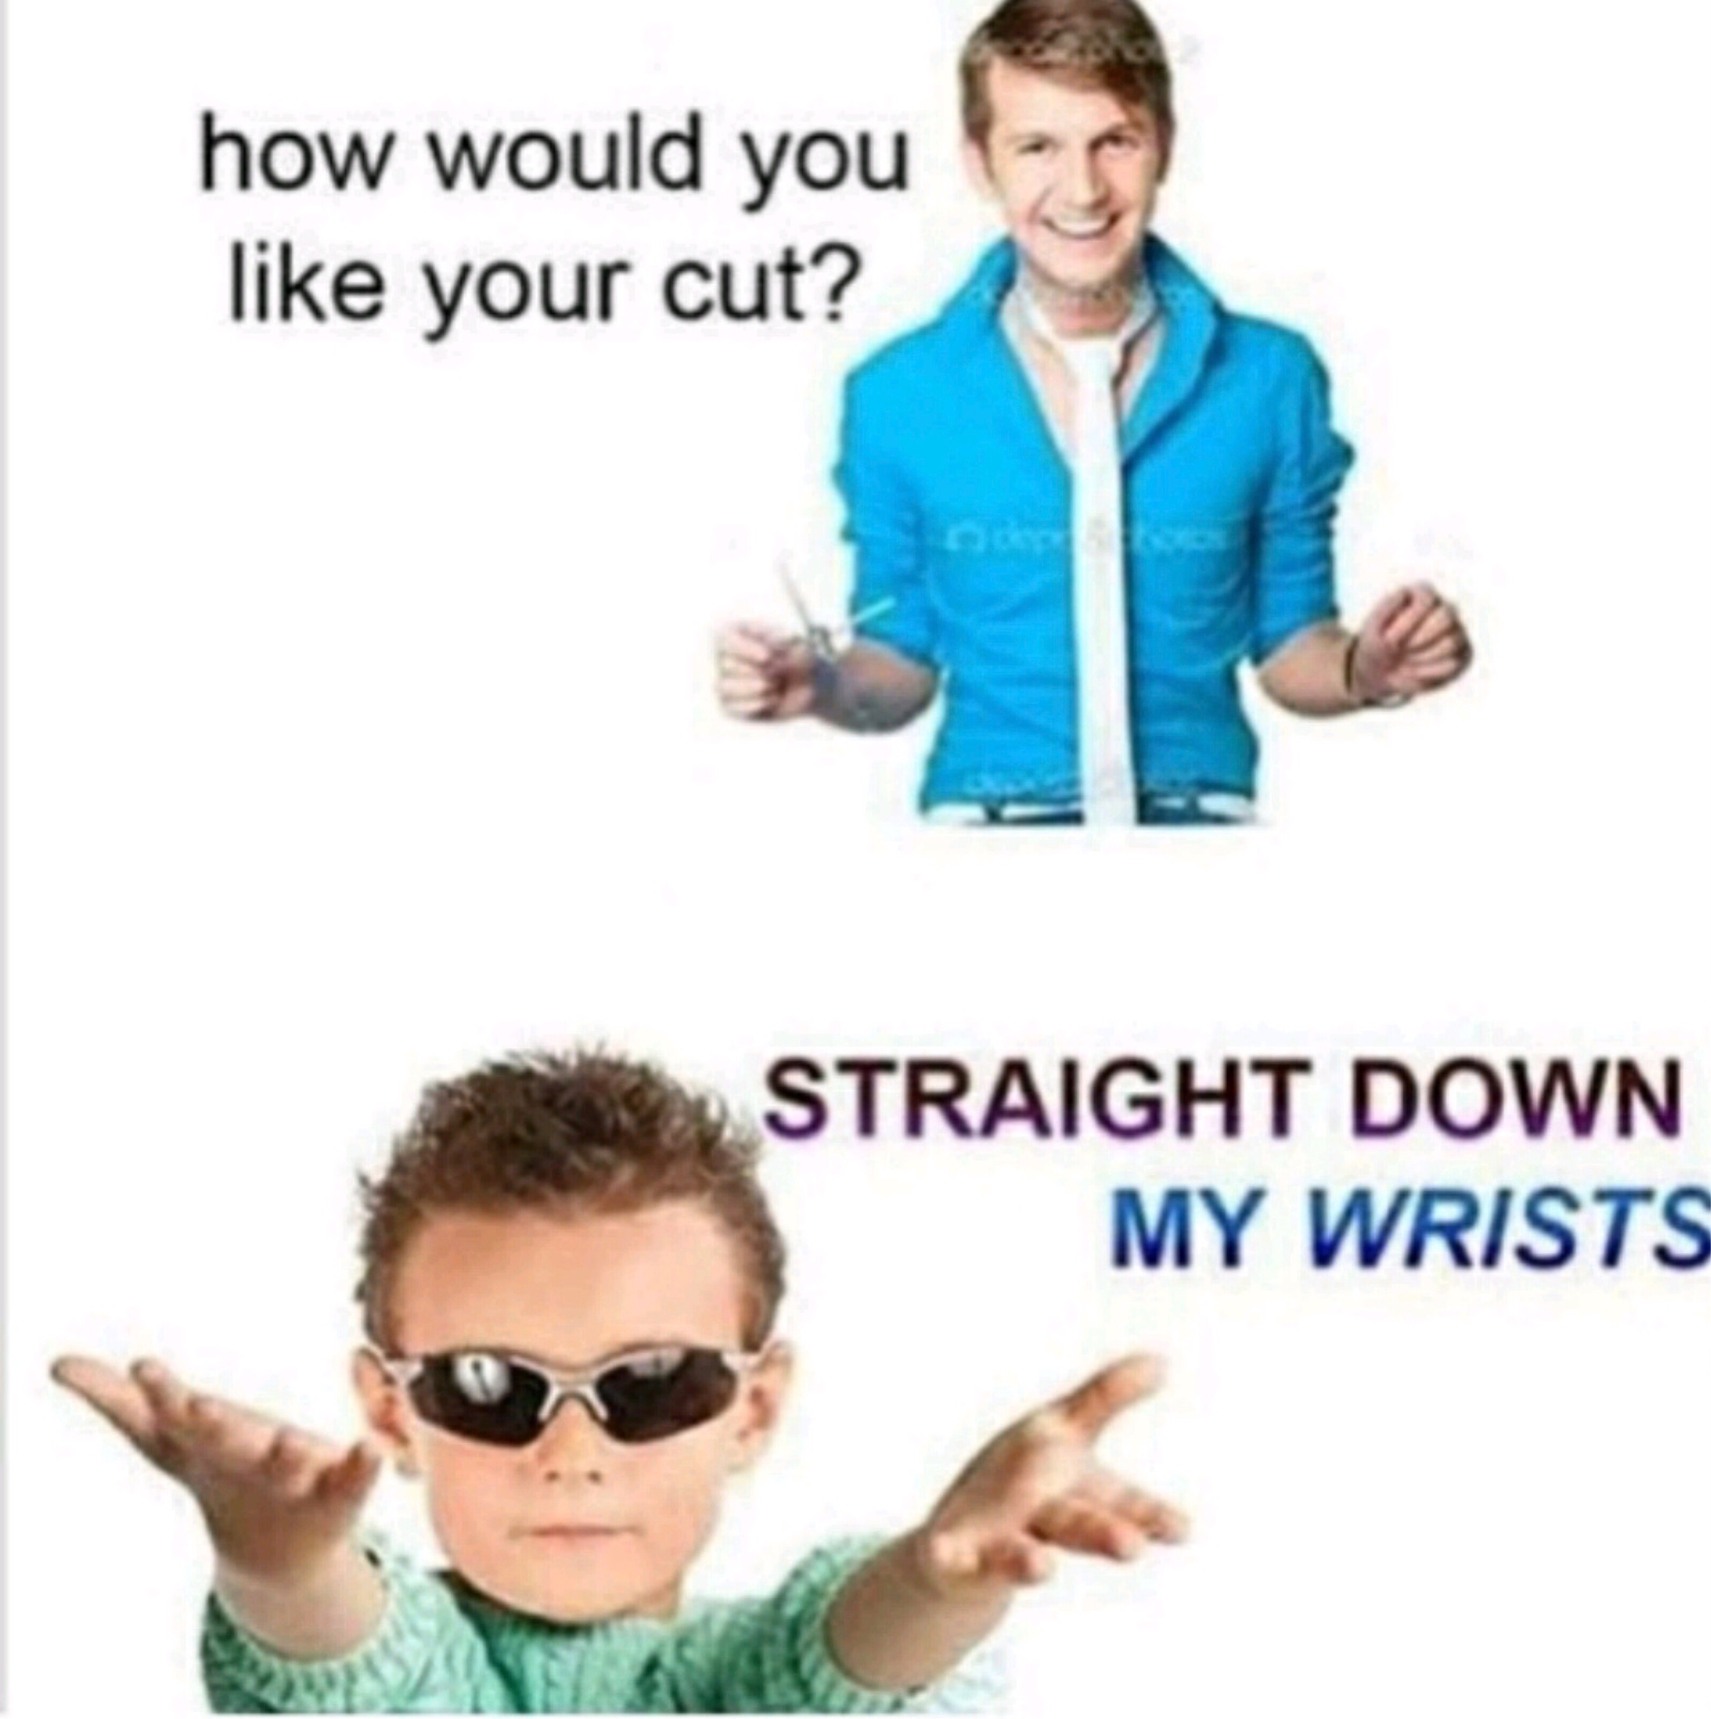 Straight down. Your Cut.